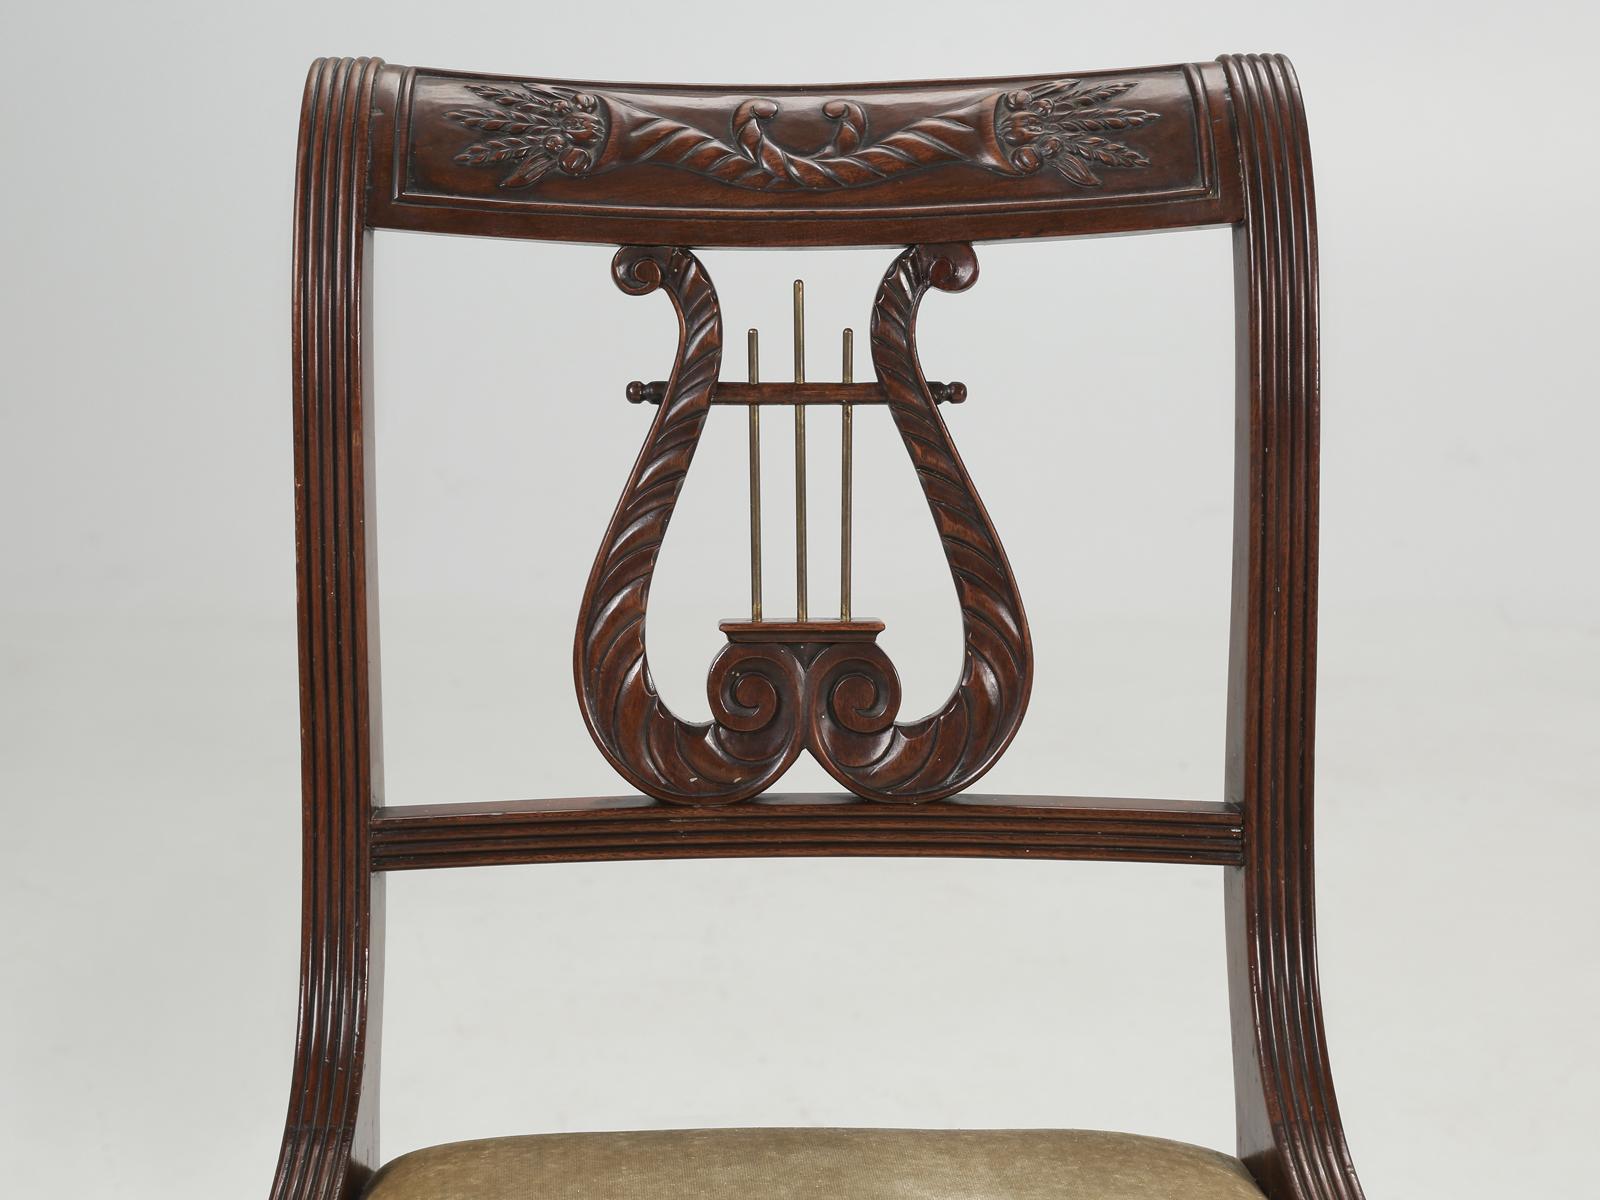 Antique English mahogany lyre back chair drew its design element from the Greek Classical period. The lyre back chairs began appearing over 300-yeards ago and are still used to this day. This would make for an ideal desk chair.
**Fabric has a small